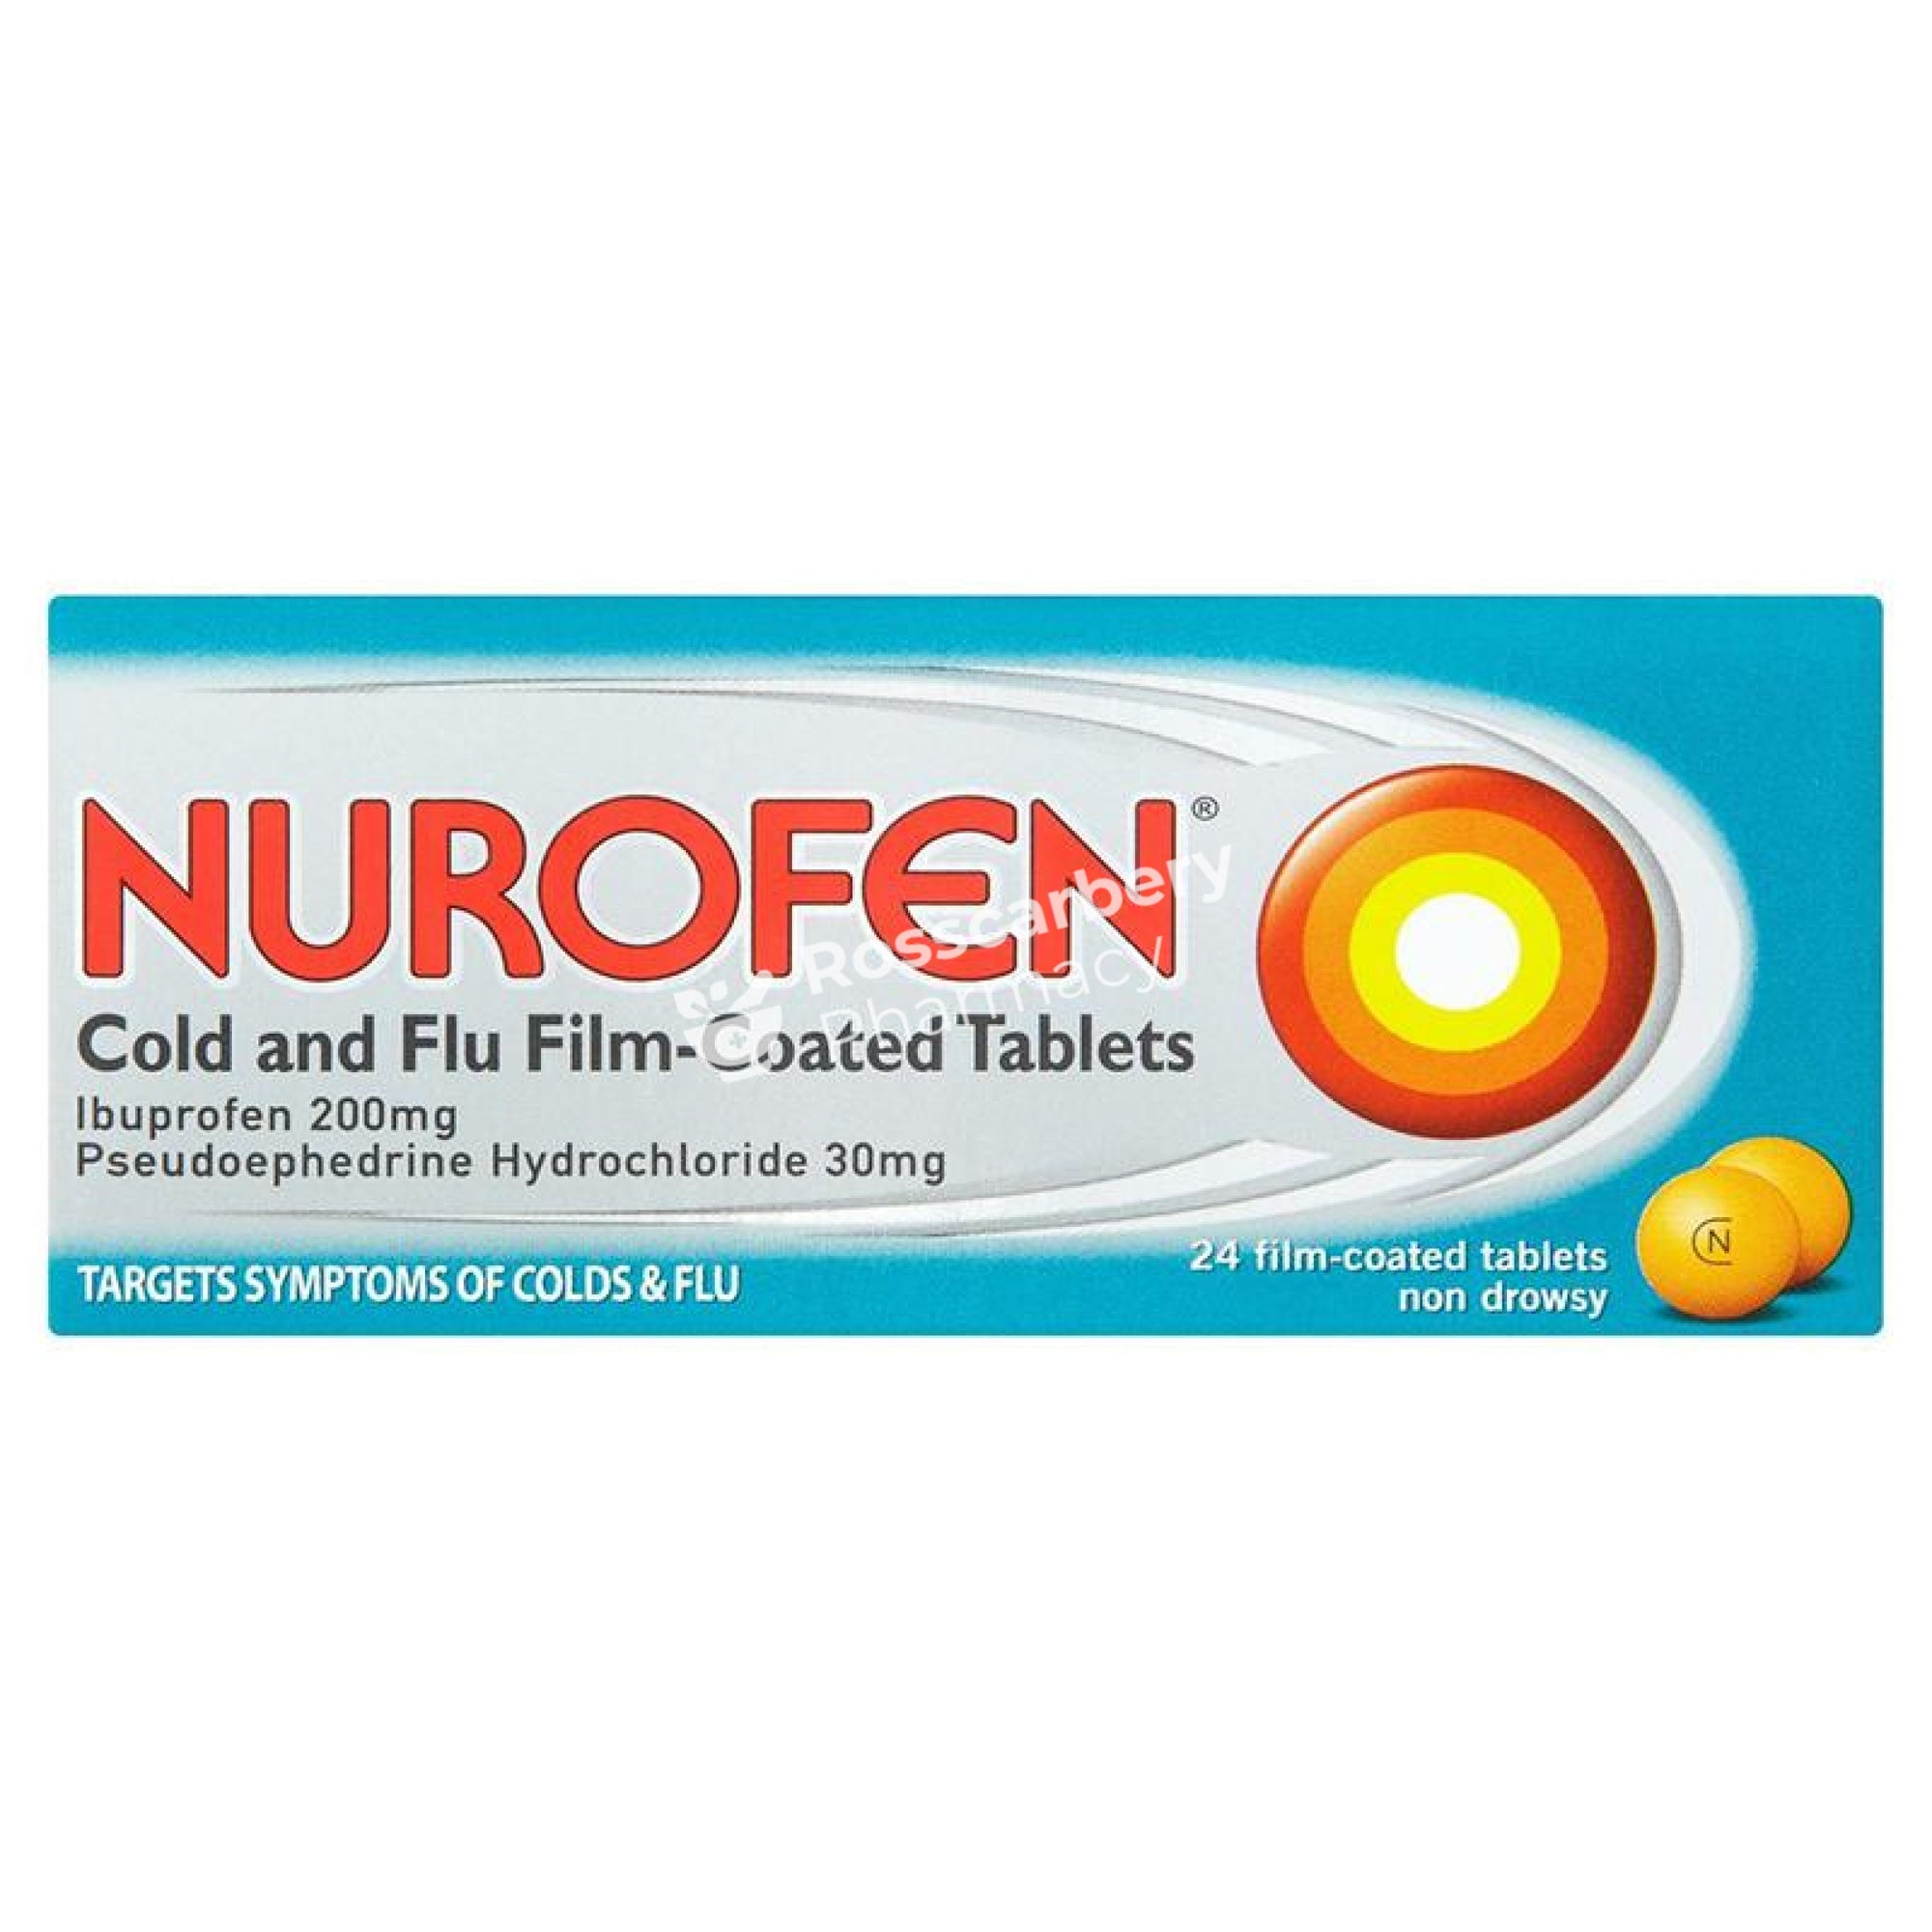 Nurofen Cold & Flu Film-Coated Tablets Combination Products